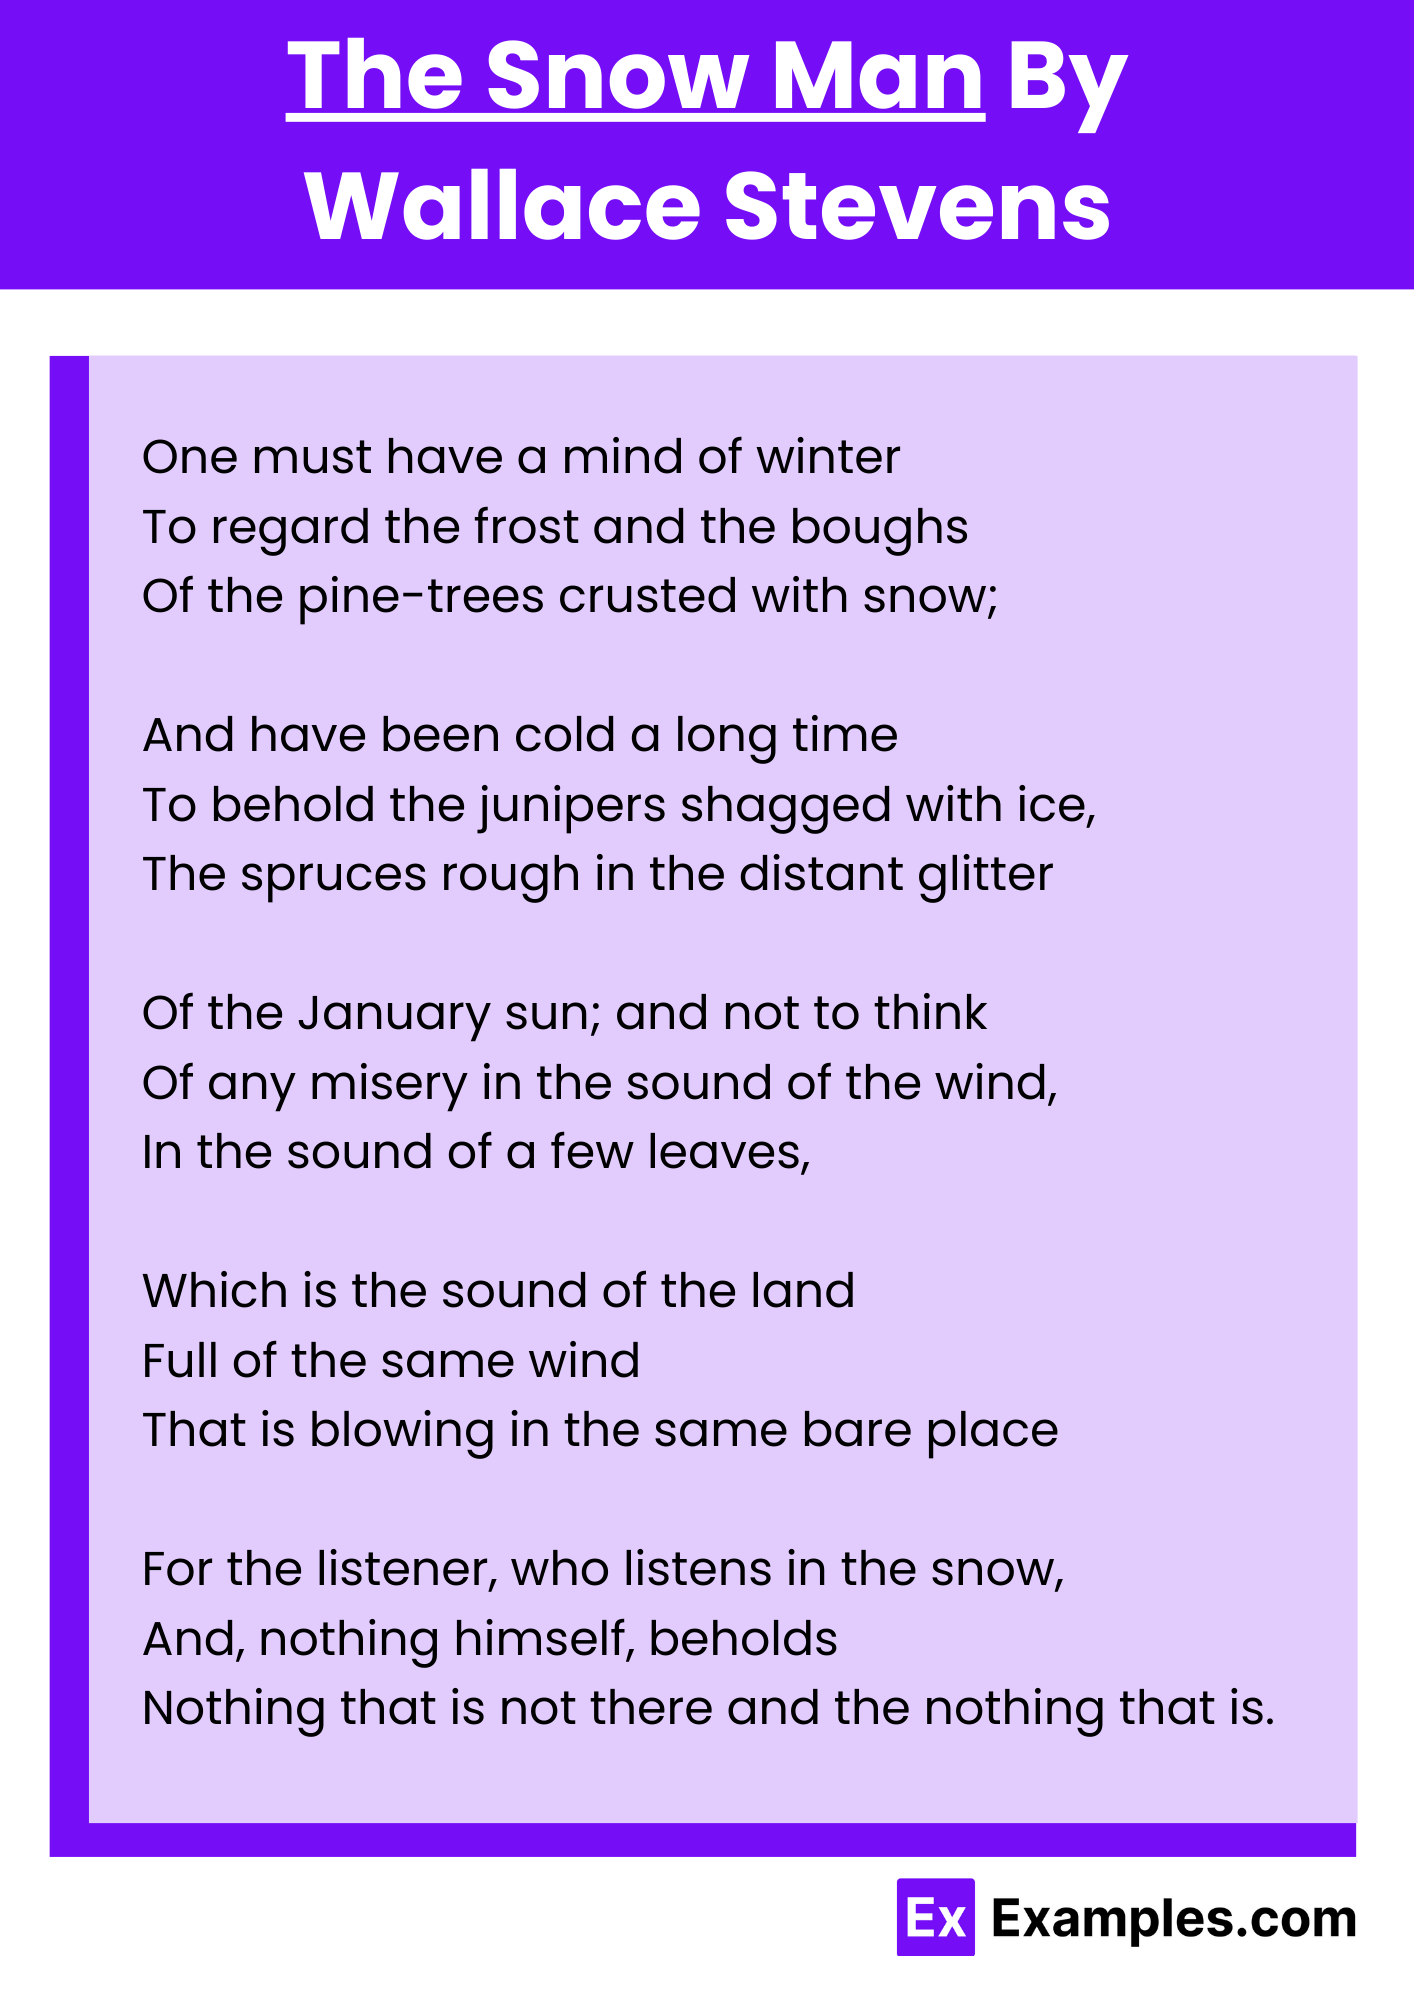 The Snow Man By Wallace Stevens